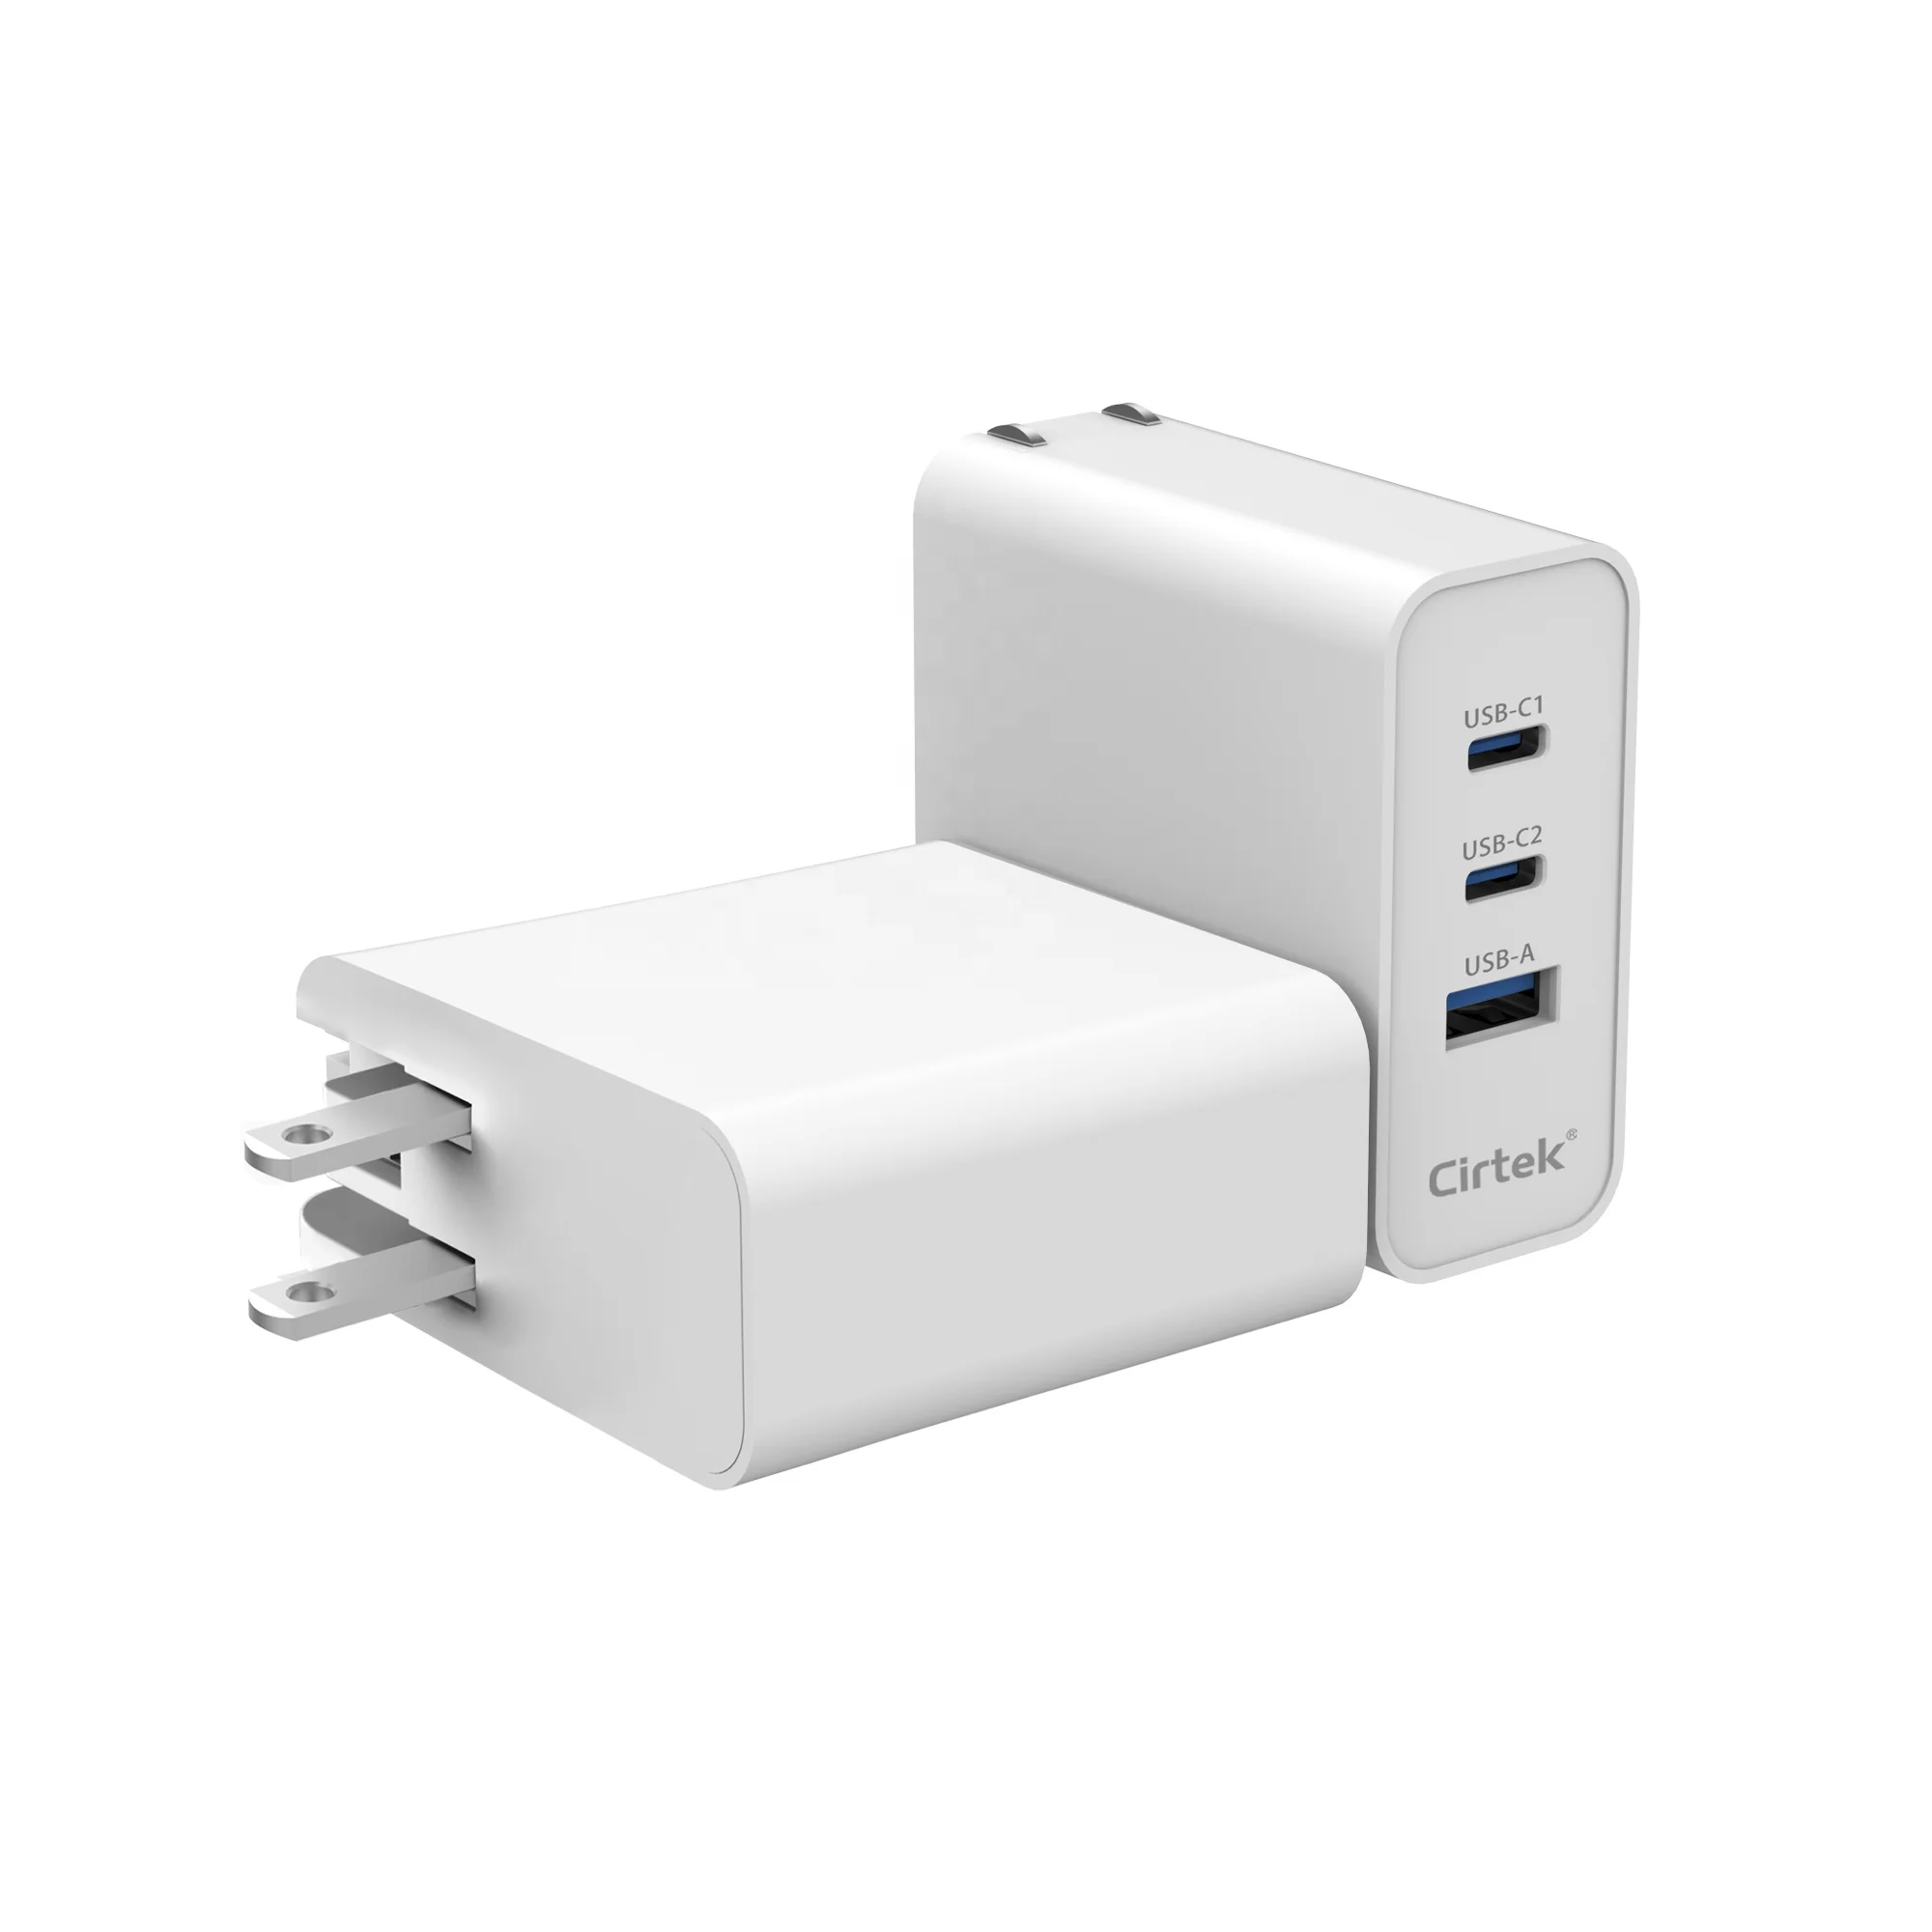 

Cirtek GaN three port interface usb c usb a fast charger RoHs CE FCC ETL certified 65w wall charger fast adapter, White